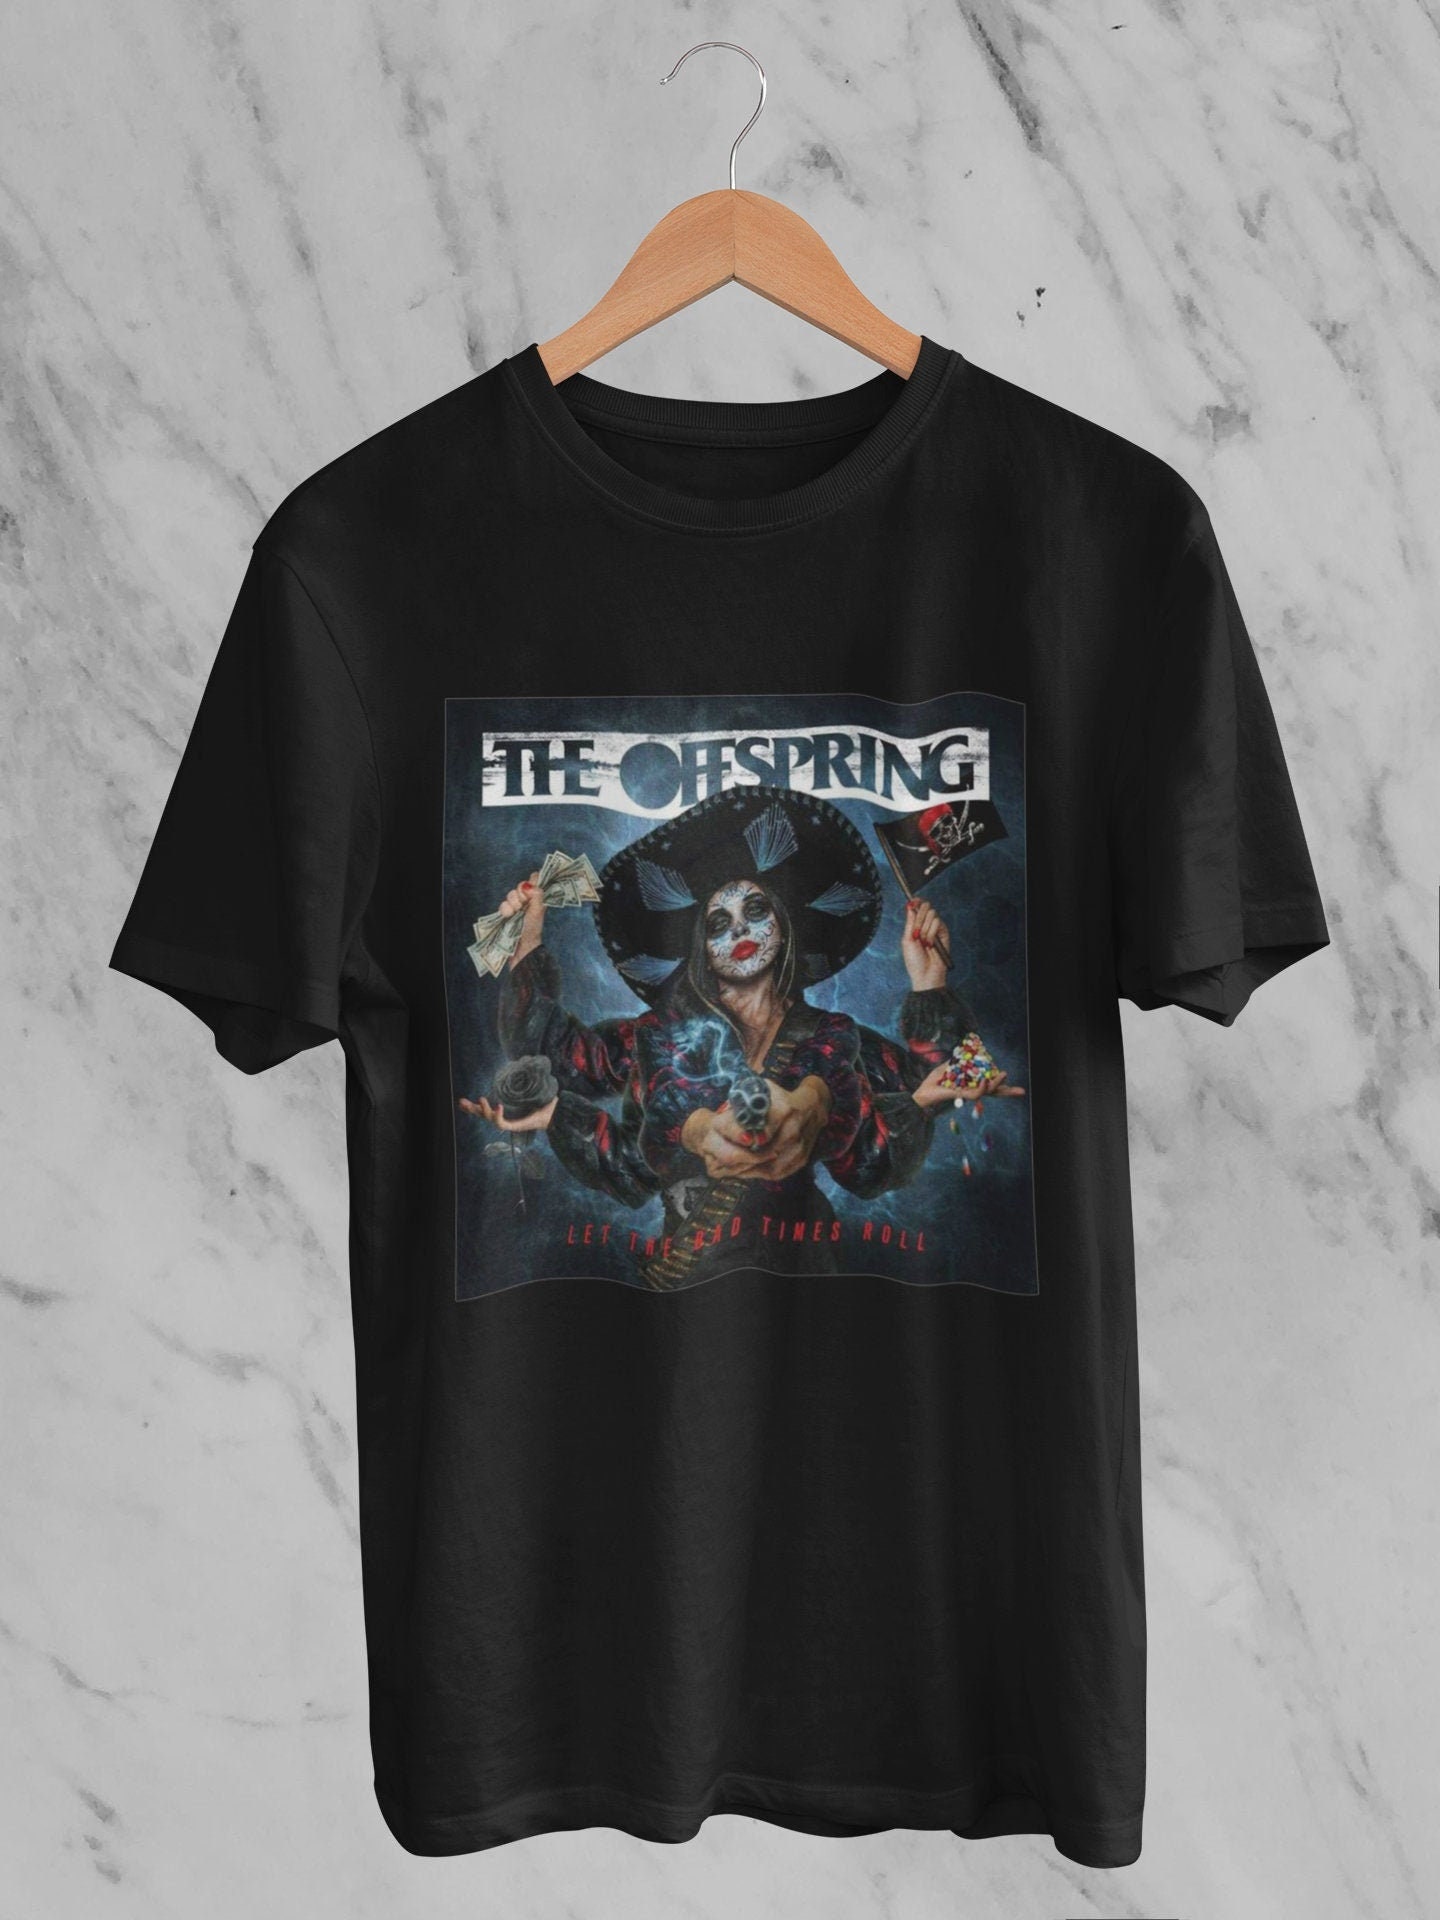 Discover Let The Bad Times Roll The Offspring T-shirt, The Offspring Let The Bad Times Roll Tour 2022 Shirt